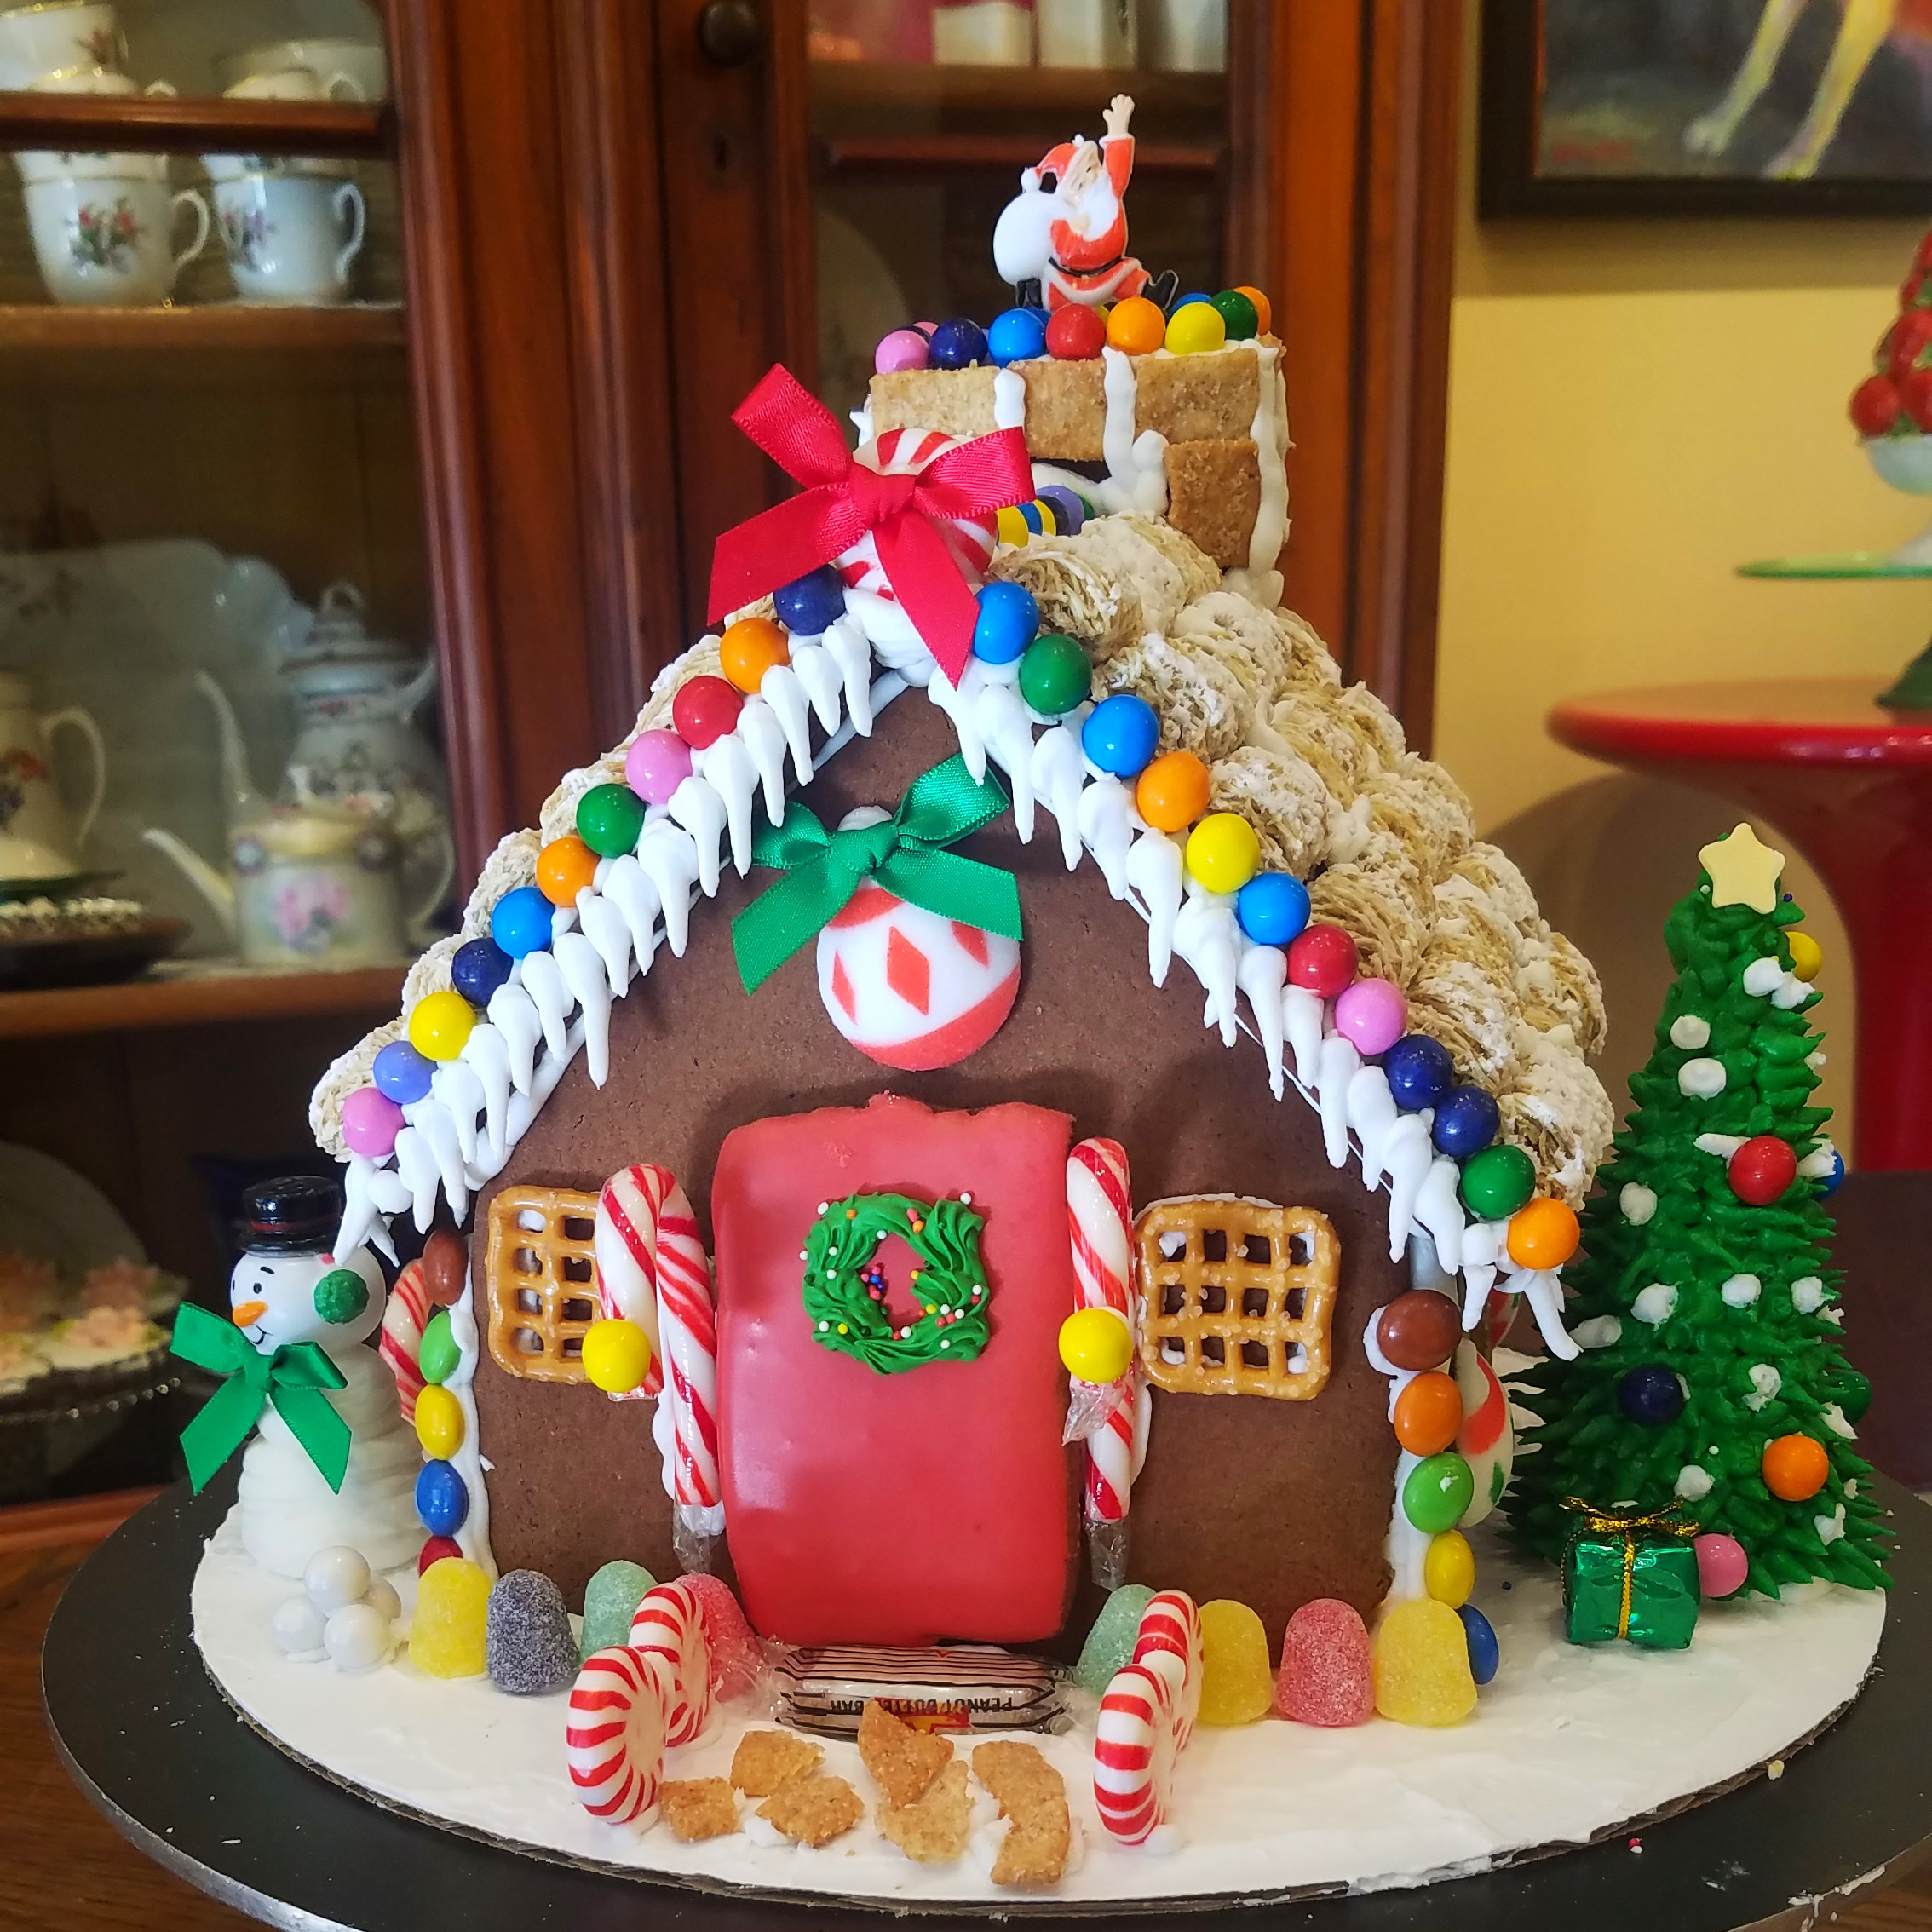 Gingerbread House 2020